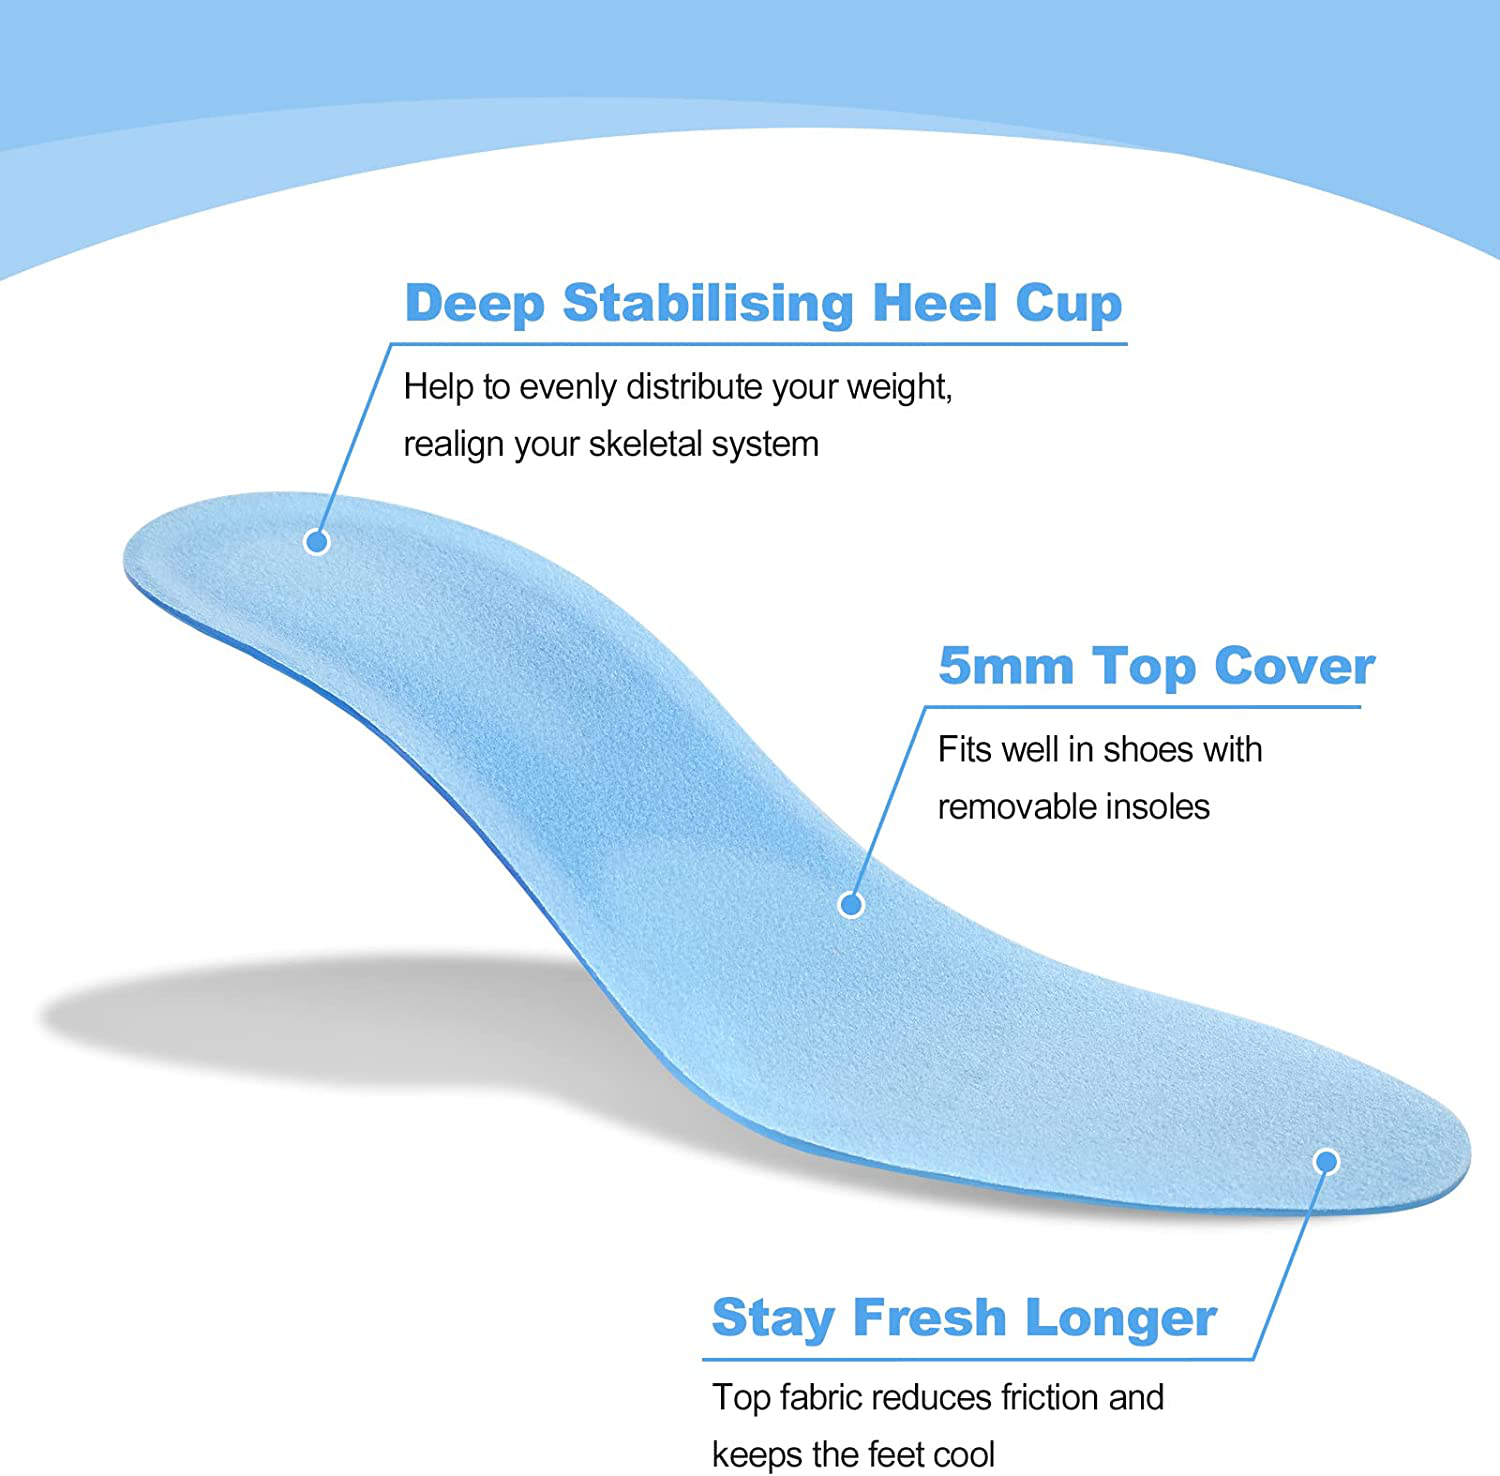 Shoe Inserts - Arch Supports Orthotics Inserts Ultra-Soft Cushioning and Lasting Comfort Feet Insoles Orthotics Inserts Relieve Flat Feet, High Arch, Foot Pain for Men and Women